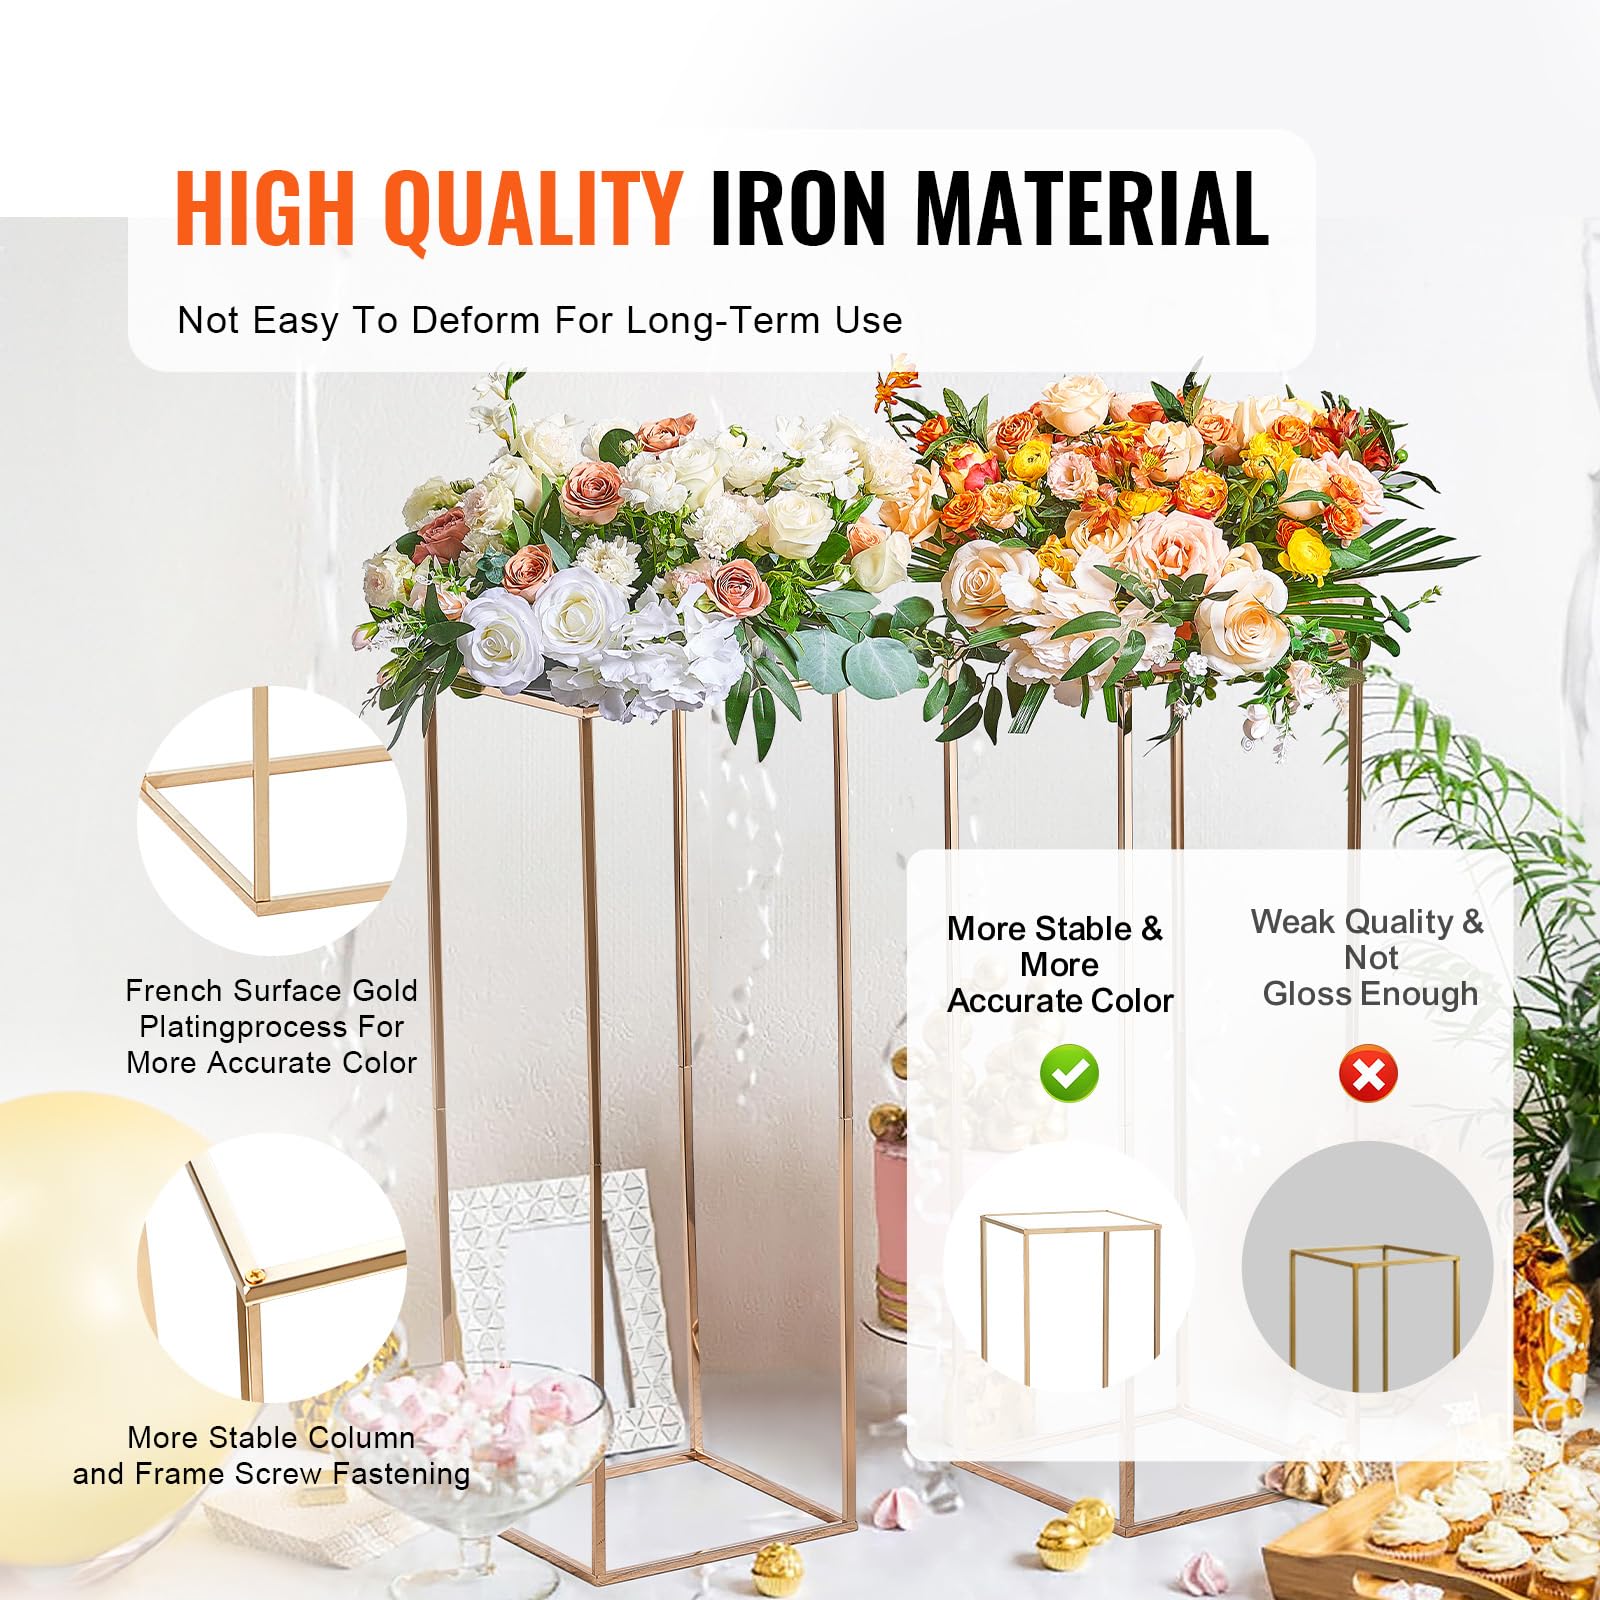 VEVOR 2PCS 31.5inch/80cm High Wedding Flower Stand, Metal Vase Column Geometric Centerpiece Stands, Gold Rectangular Floral Display Rack for T-Stage Events Reception, Party Decoration Home